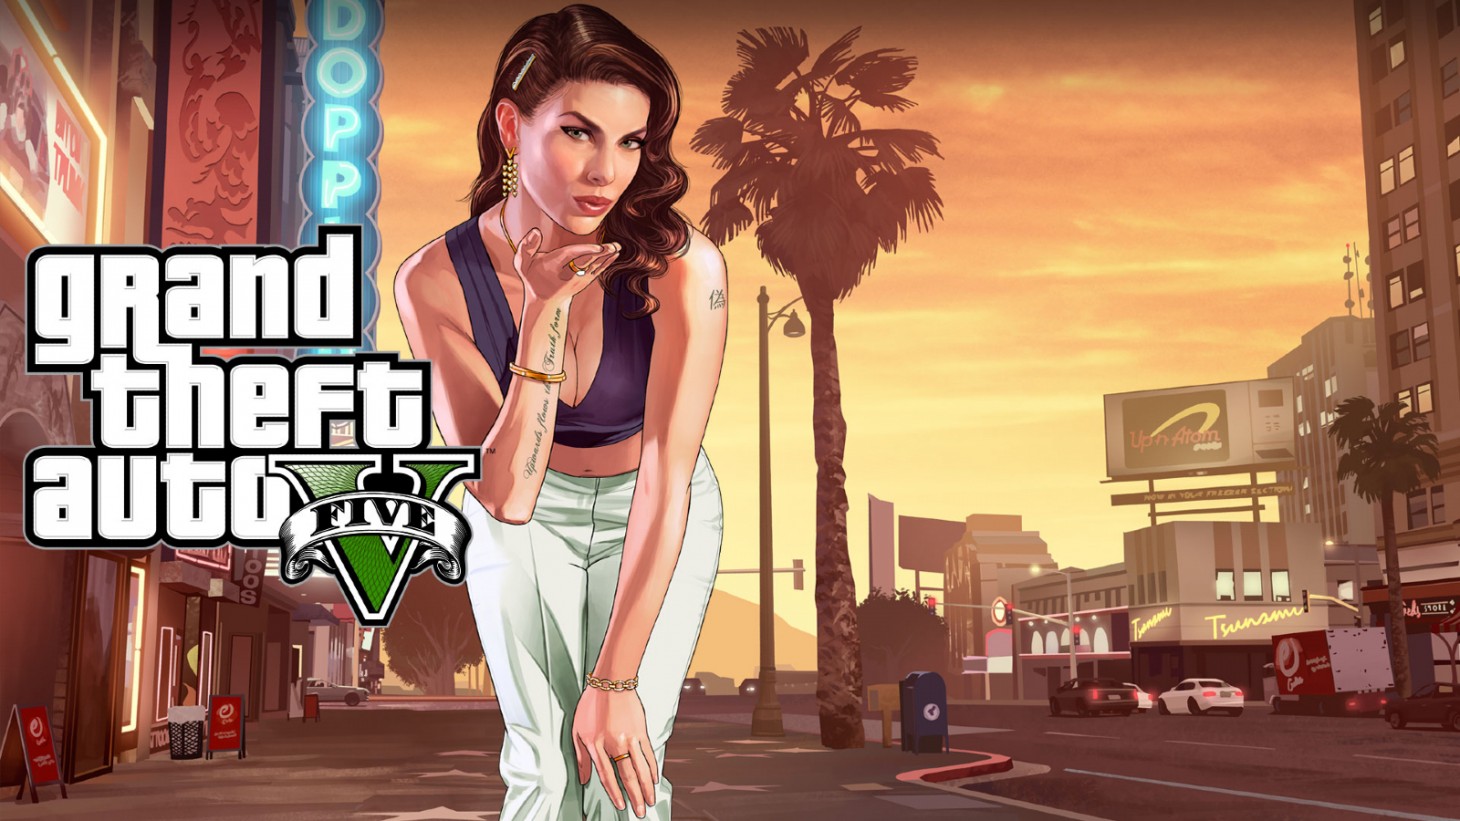 Global Grand Theft Auto all time unit sales 2023